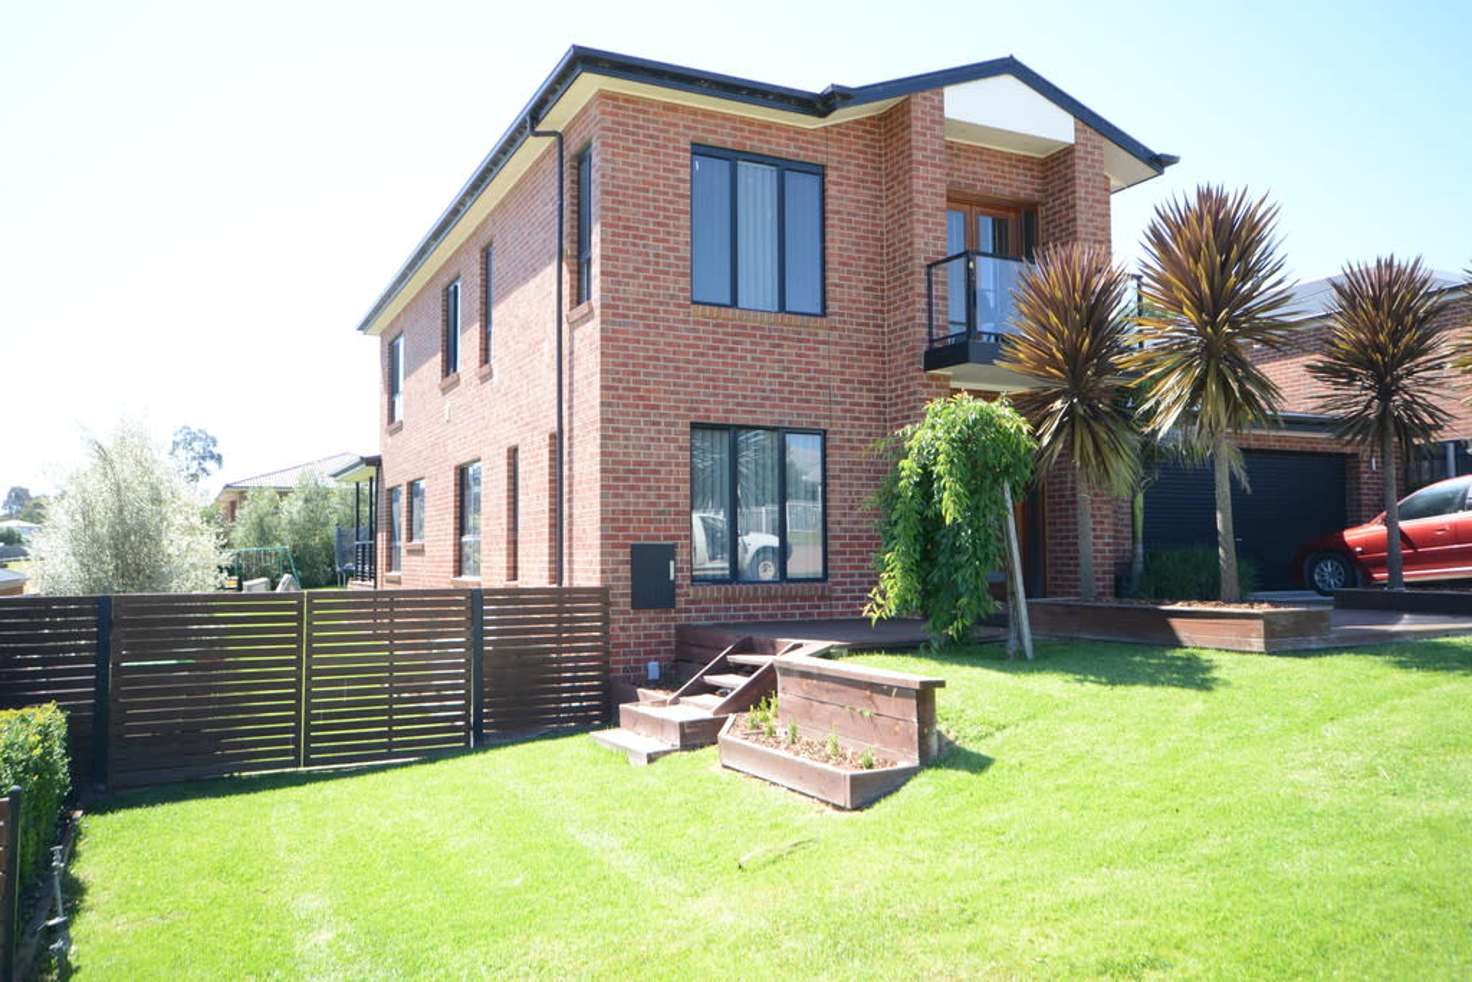 Main view of Homely house listing, 25 BALLANTINE STREET, Bairnsdale VIC 3875